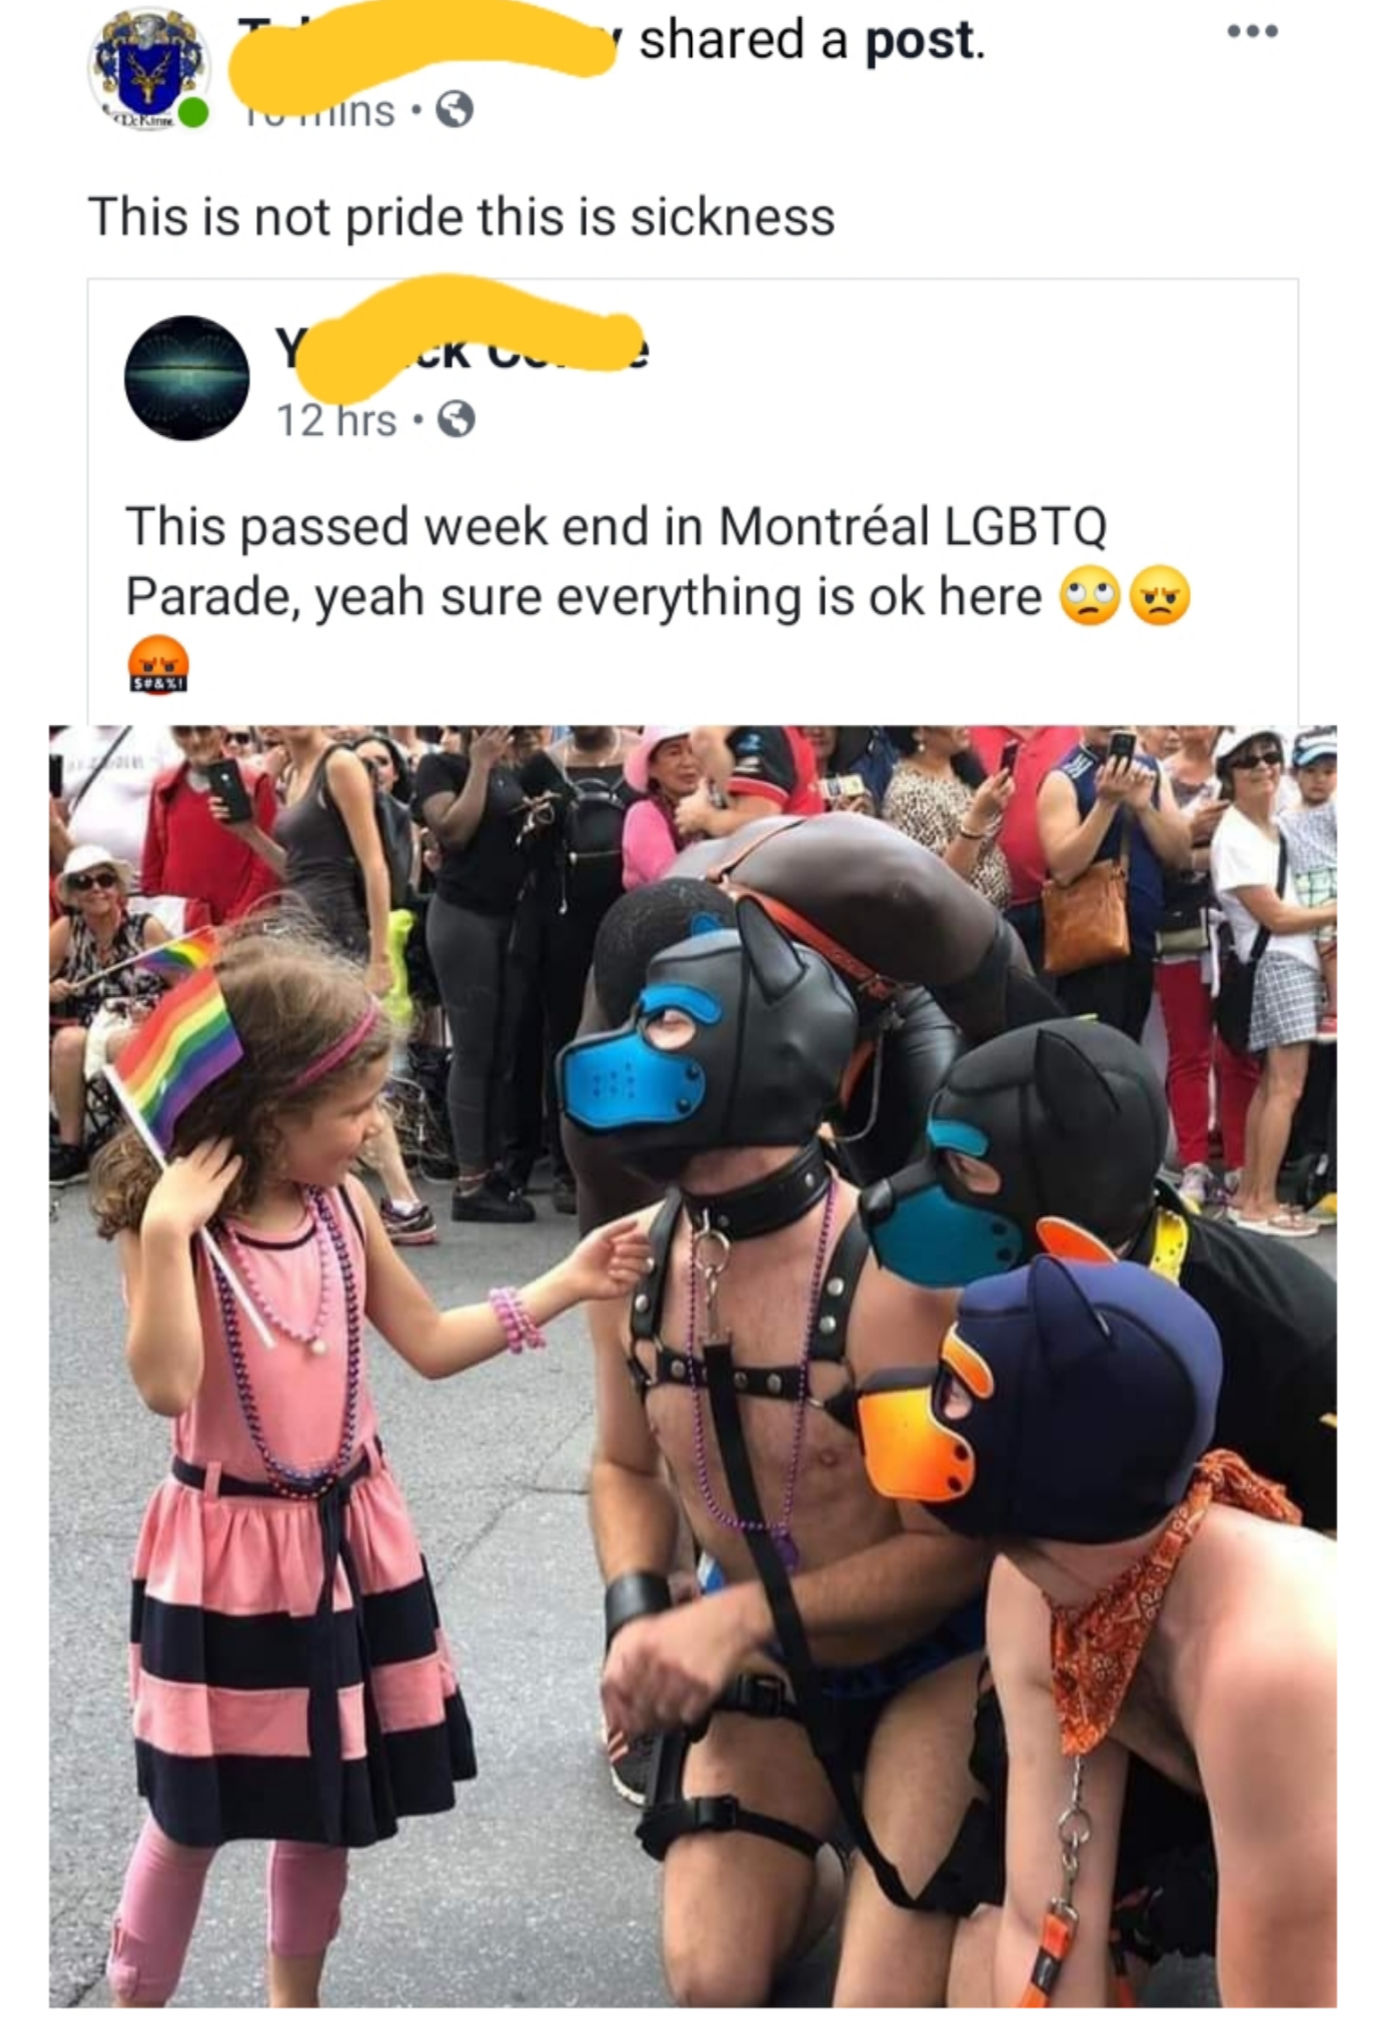 d a post wins. This is not pride this is sickness 12 hrs. This passed week end in Montral Lgbtq Parade, yeah sure everything is ok here